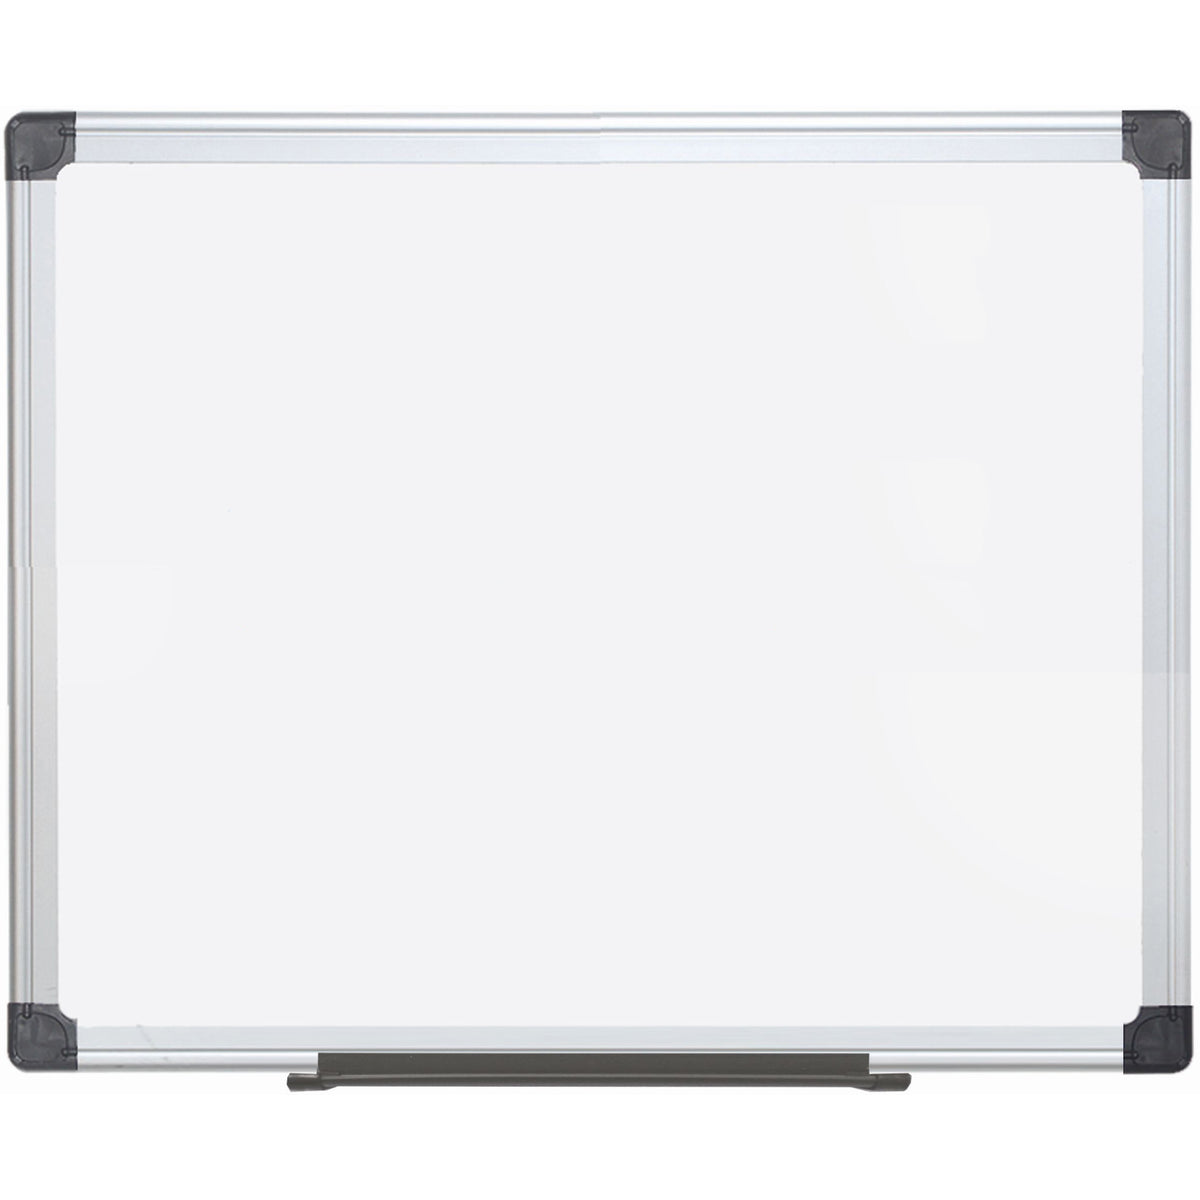 MA2112170MV Maya Series Double Sided Melamine Dry Erase White Board with Snap-On Marker Tray, 48" x 96", Aluminum Frame by MasterVision